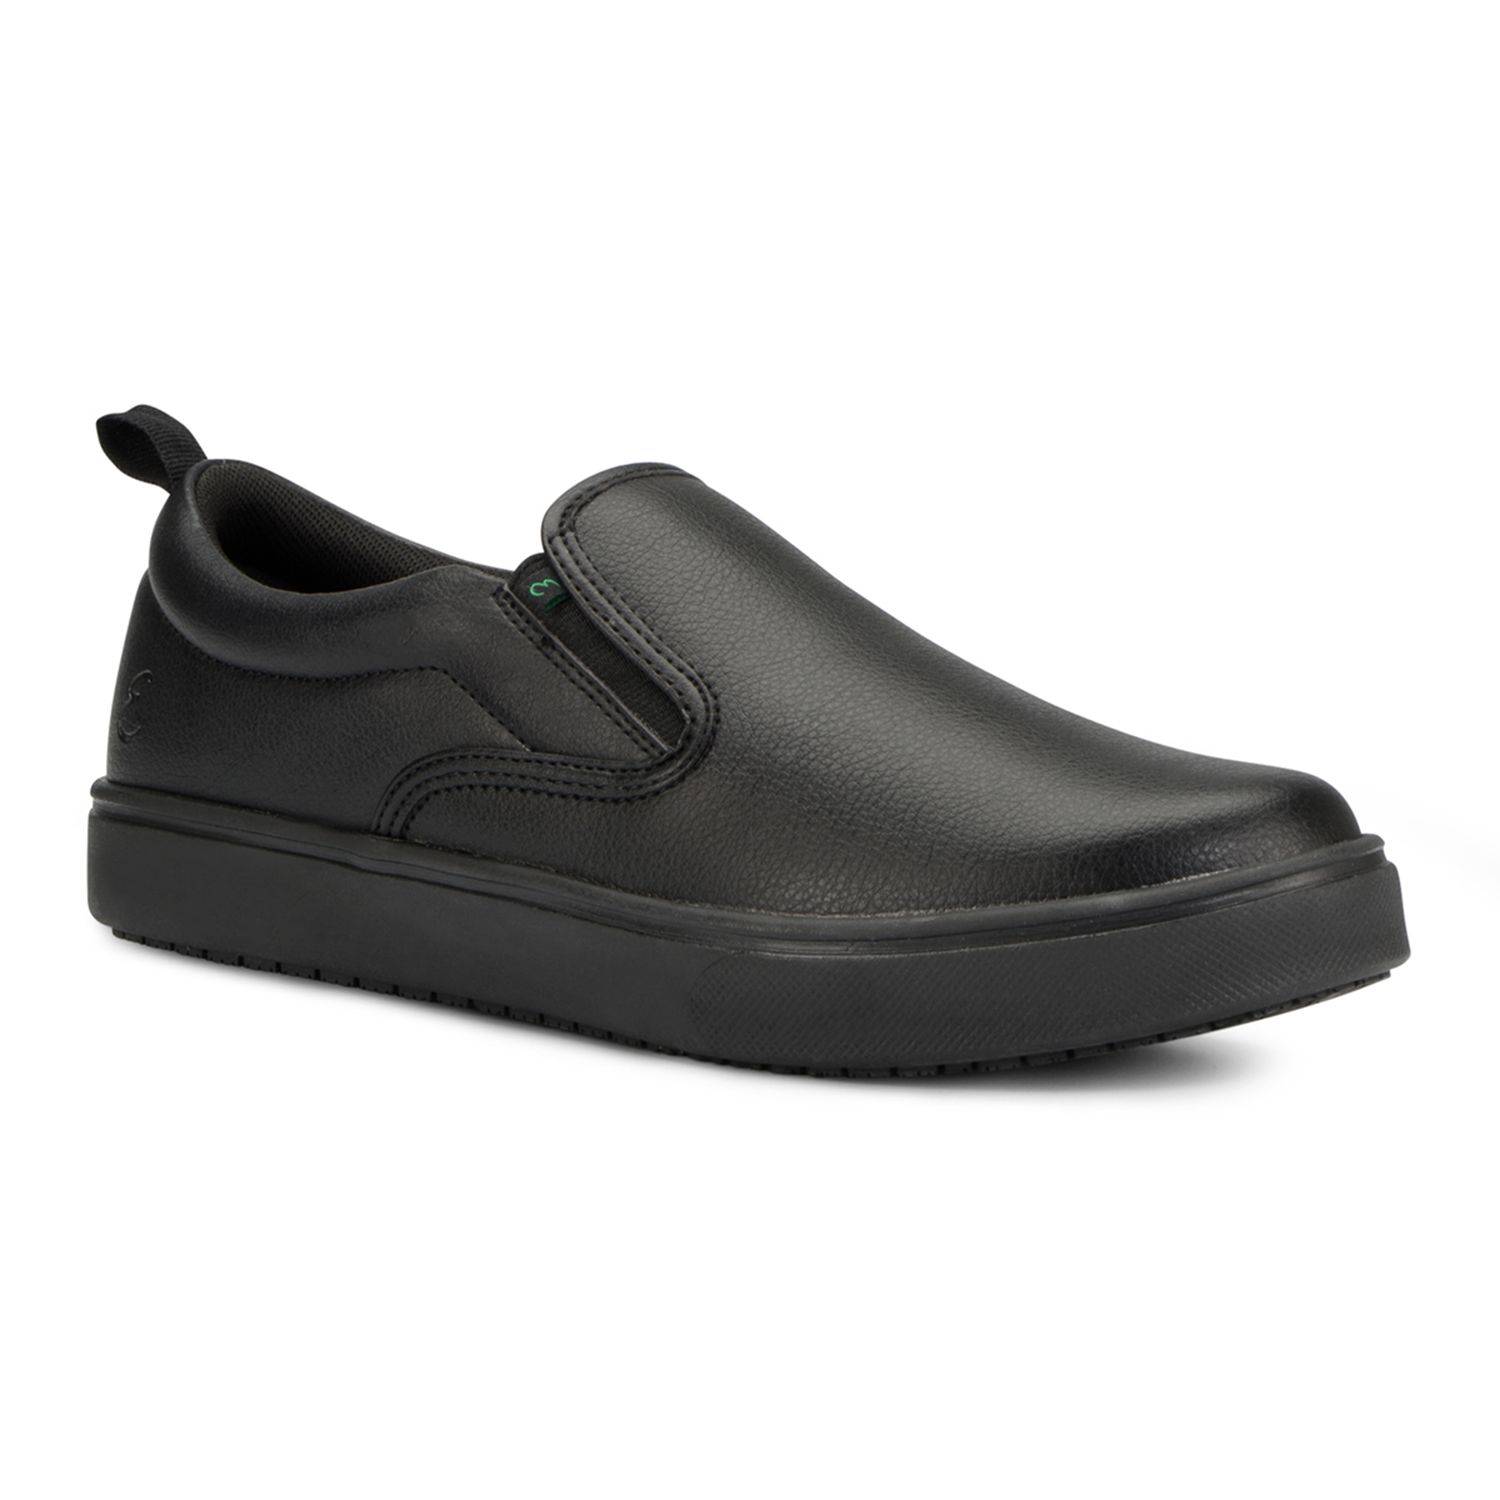 water resistant slip on shoes